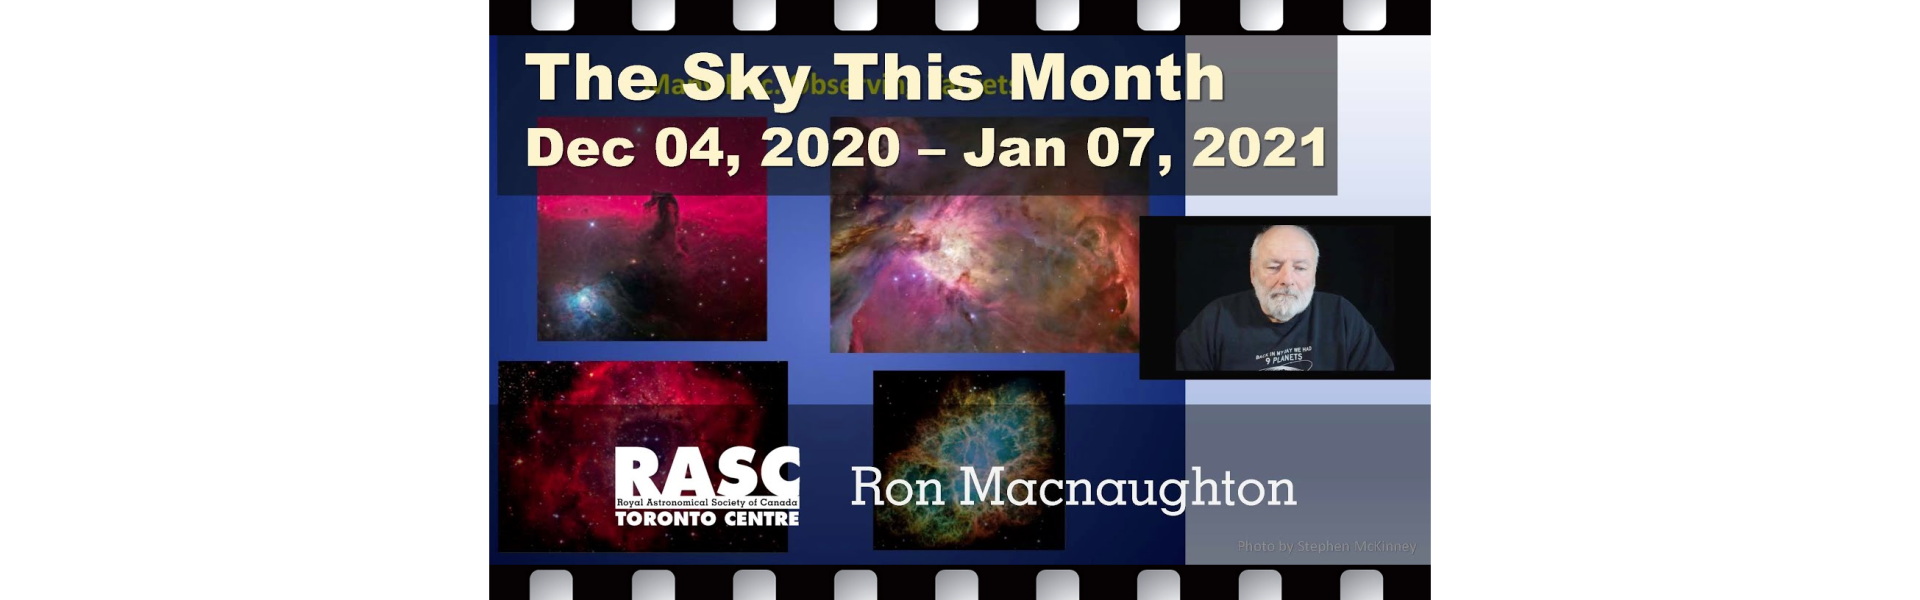 The Sky This Month for Dec 4, 2020 - Jan 7, 2021